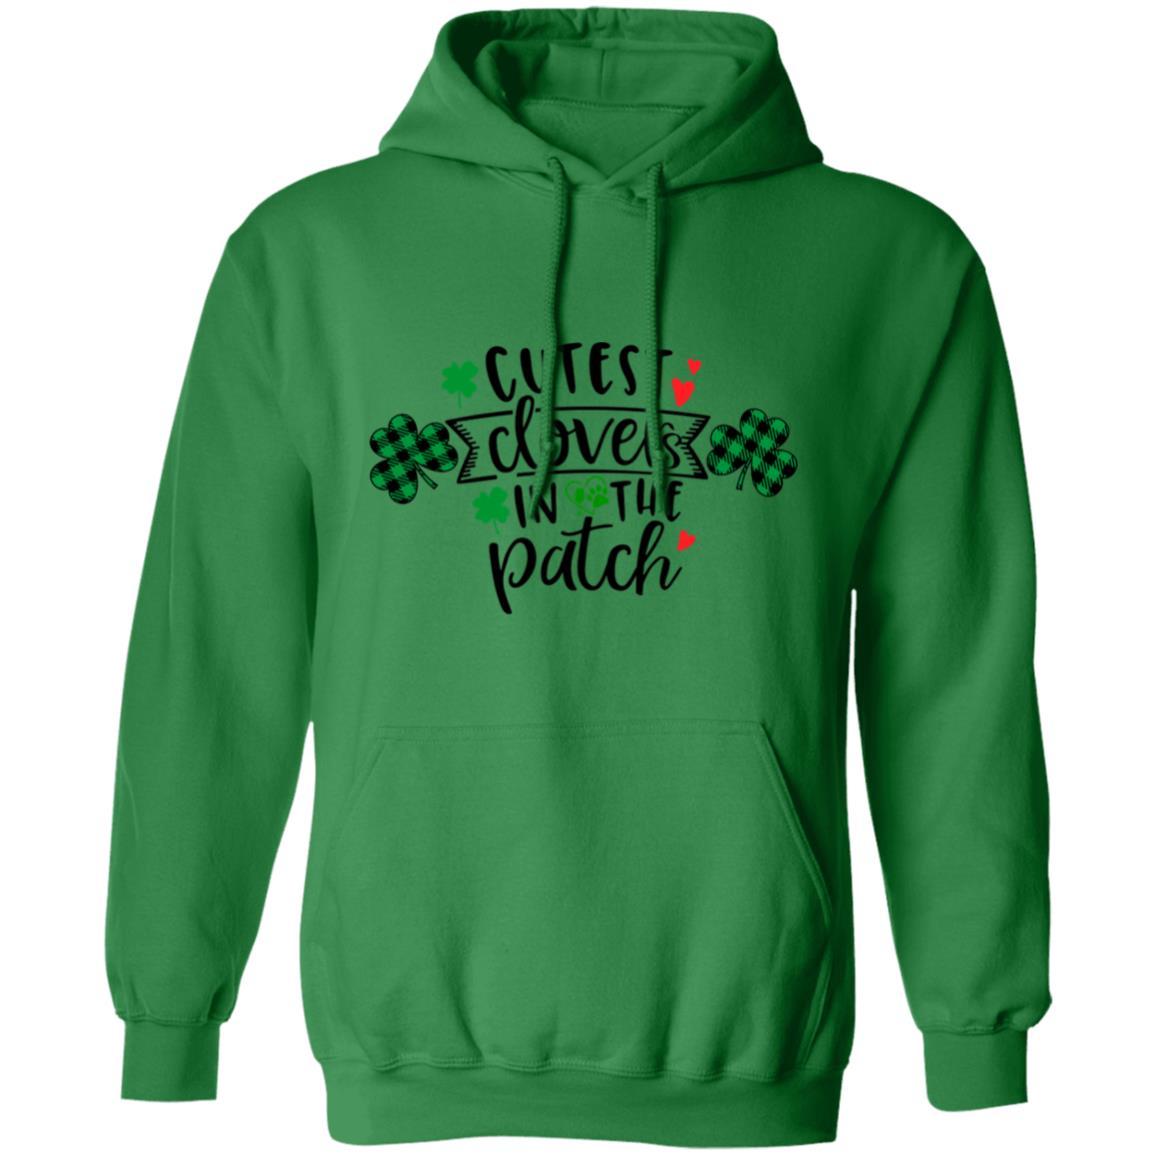 Sweatshirts Irish Green / S Winey Bitches Co "Cutest Clovers in the Patch" Pullover Hoodie 8 oz. WineyBitchesCo